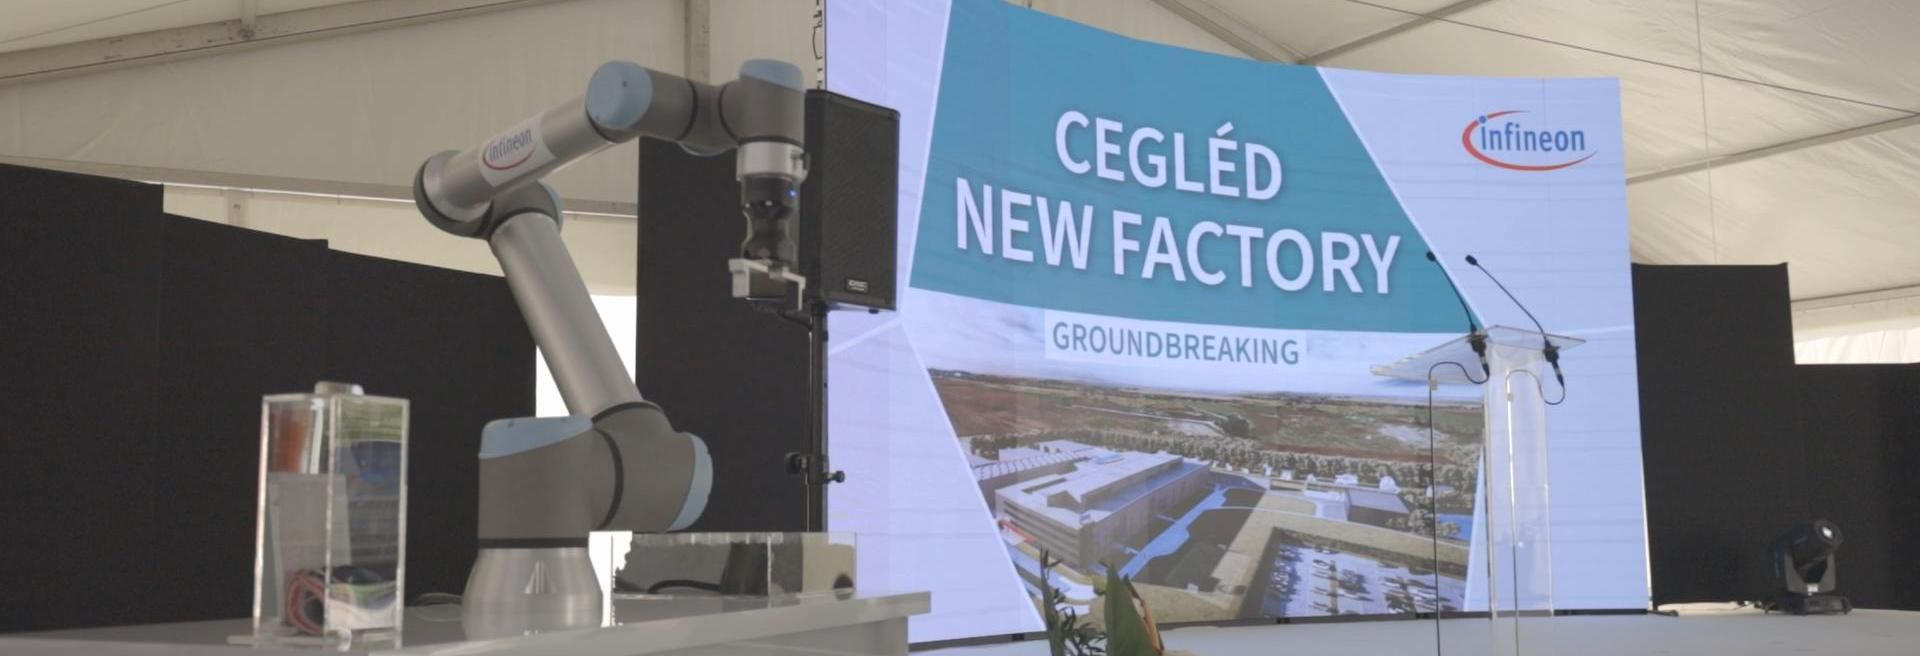 The foundation stone of the new Infineon plant has been laid in Cegléd - VIDEO REPORT